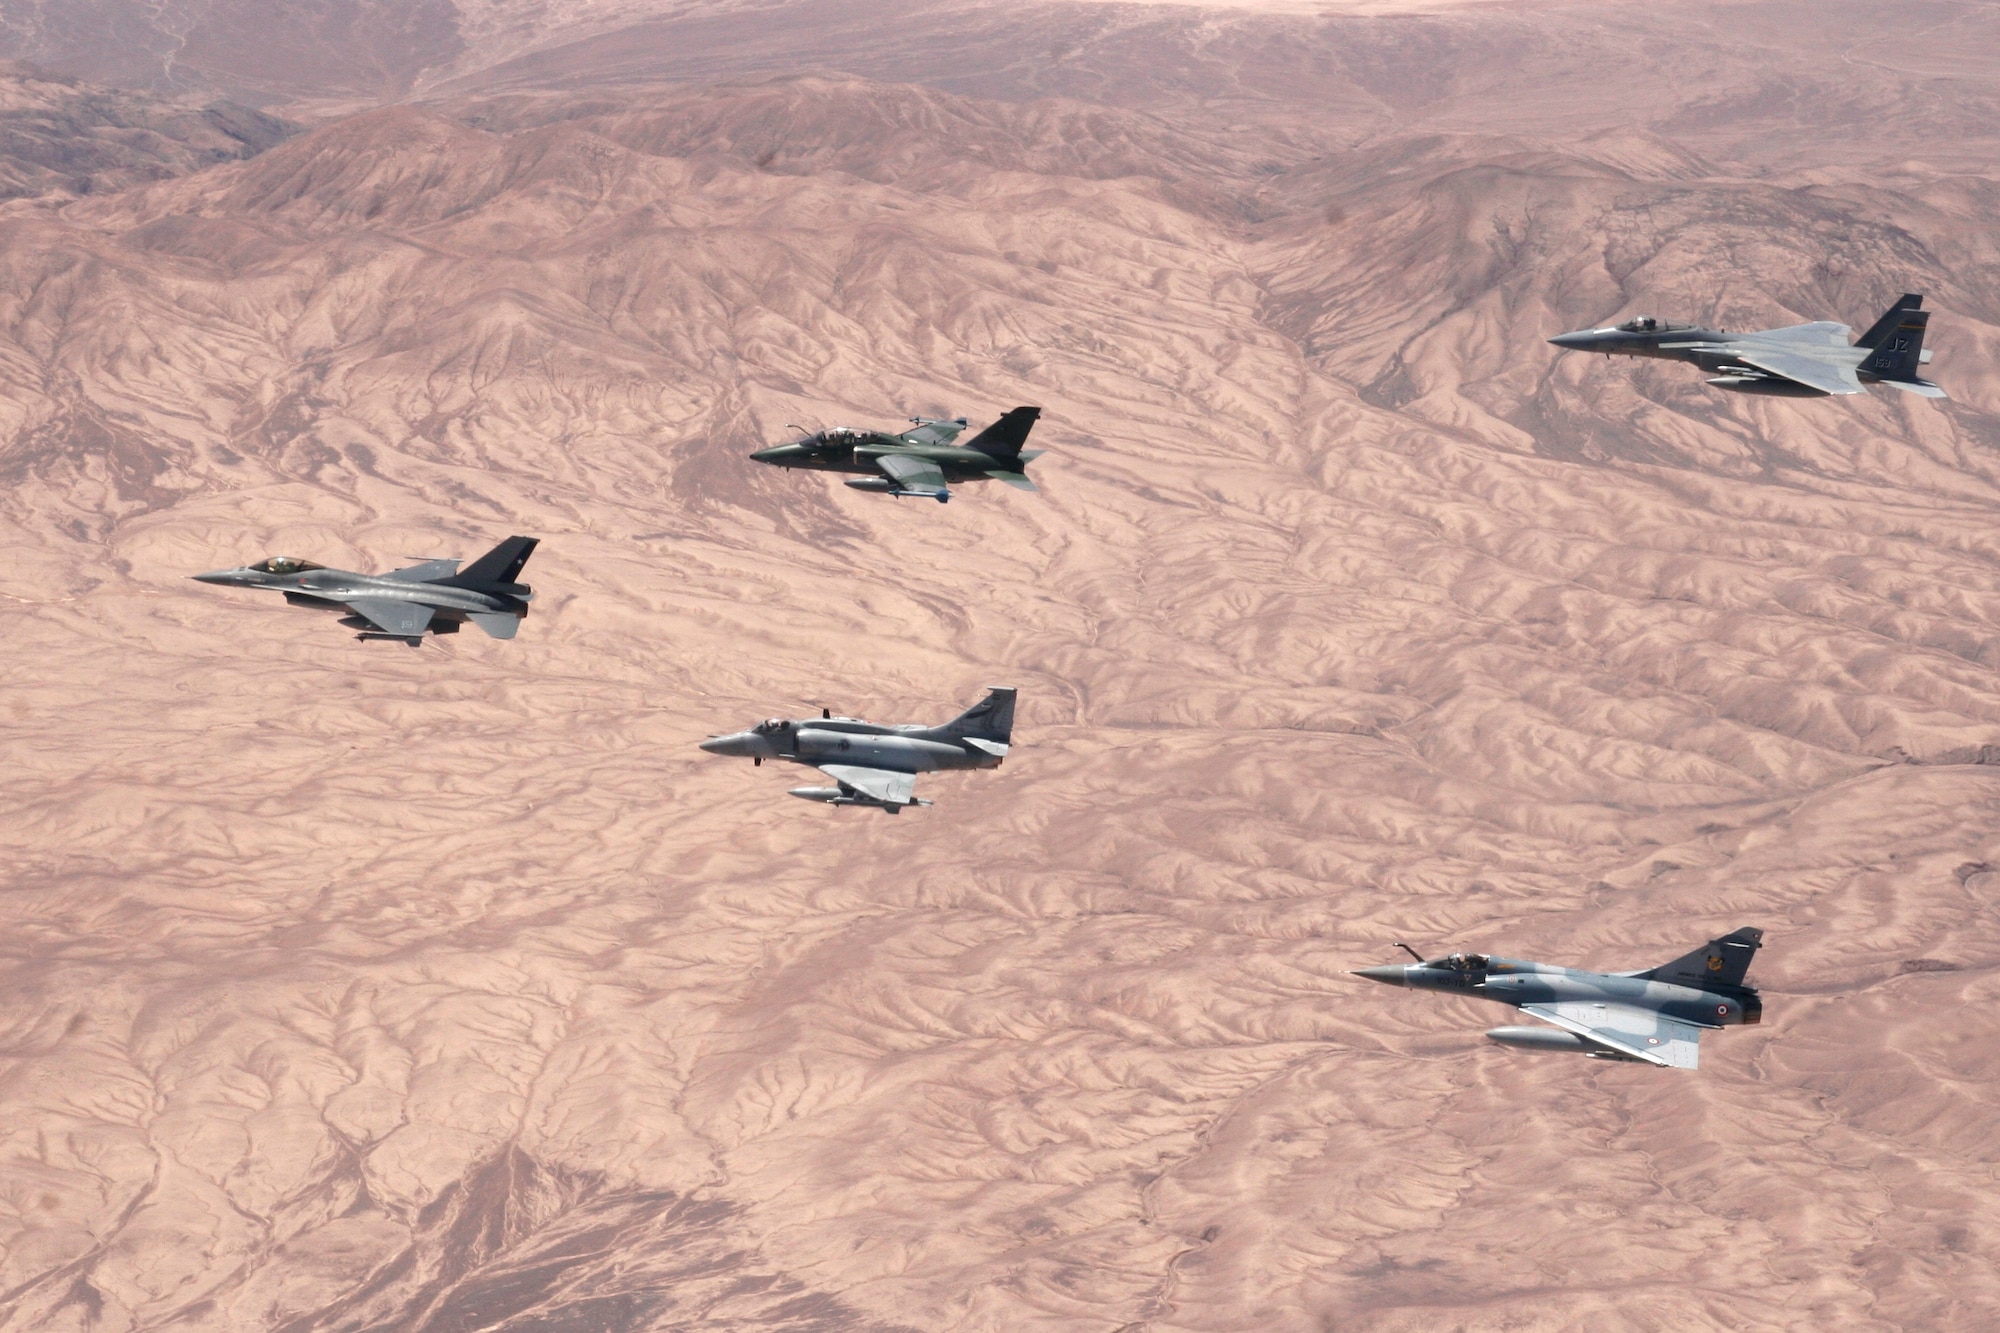 ANTOFAGASTA, Chile -- Chile, Argentina, Brazil, France and the United States participate in a dissimilar aircraft formation during Exercise SALITRE II hosted by Chile. (U.S. Air Force Photo by Technical Sergeant Travis Burke)